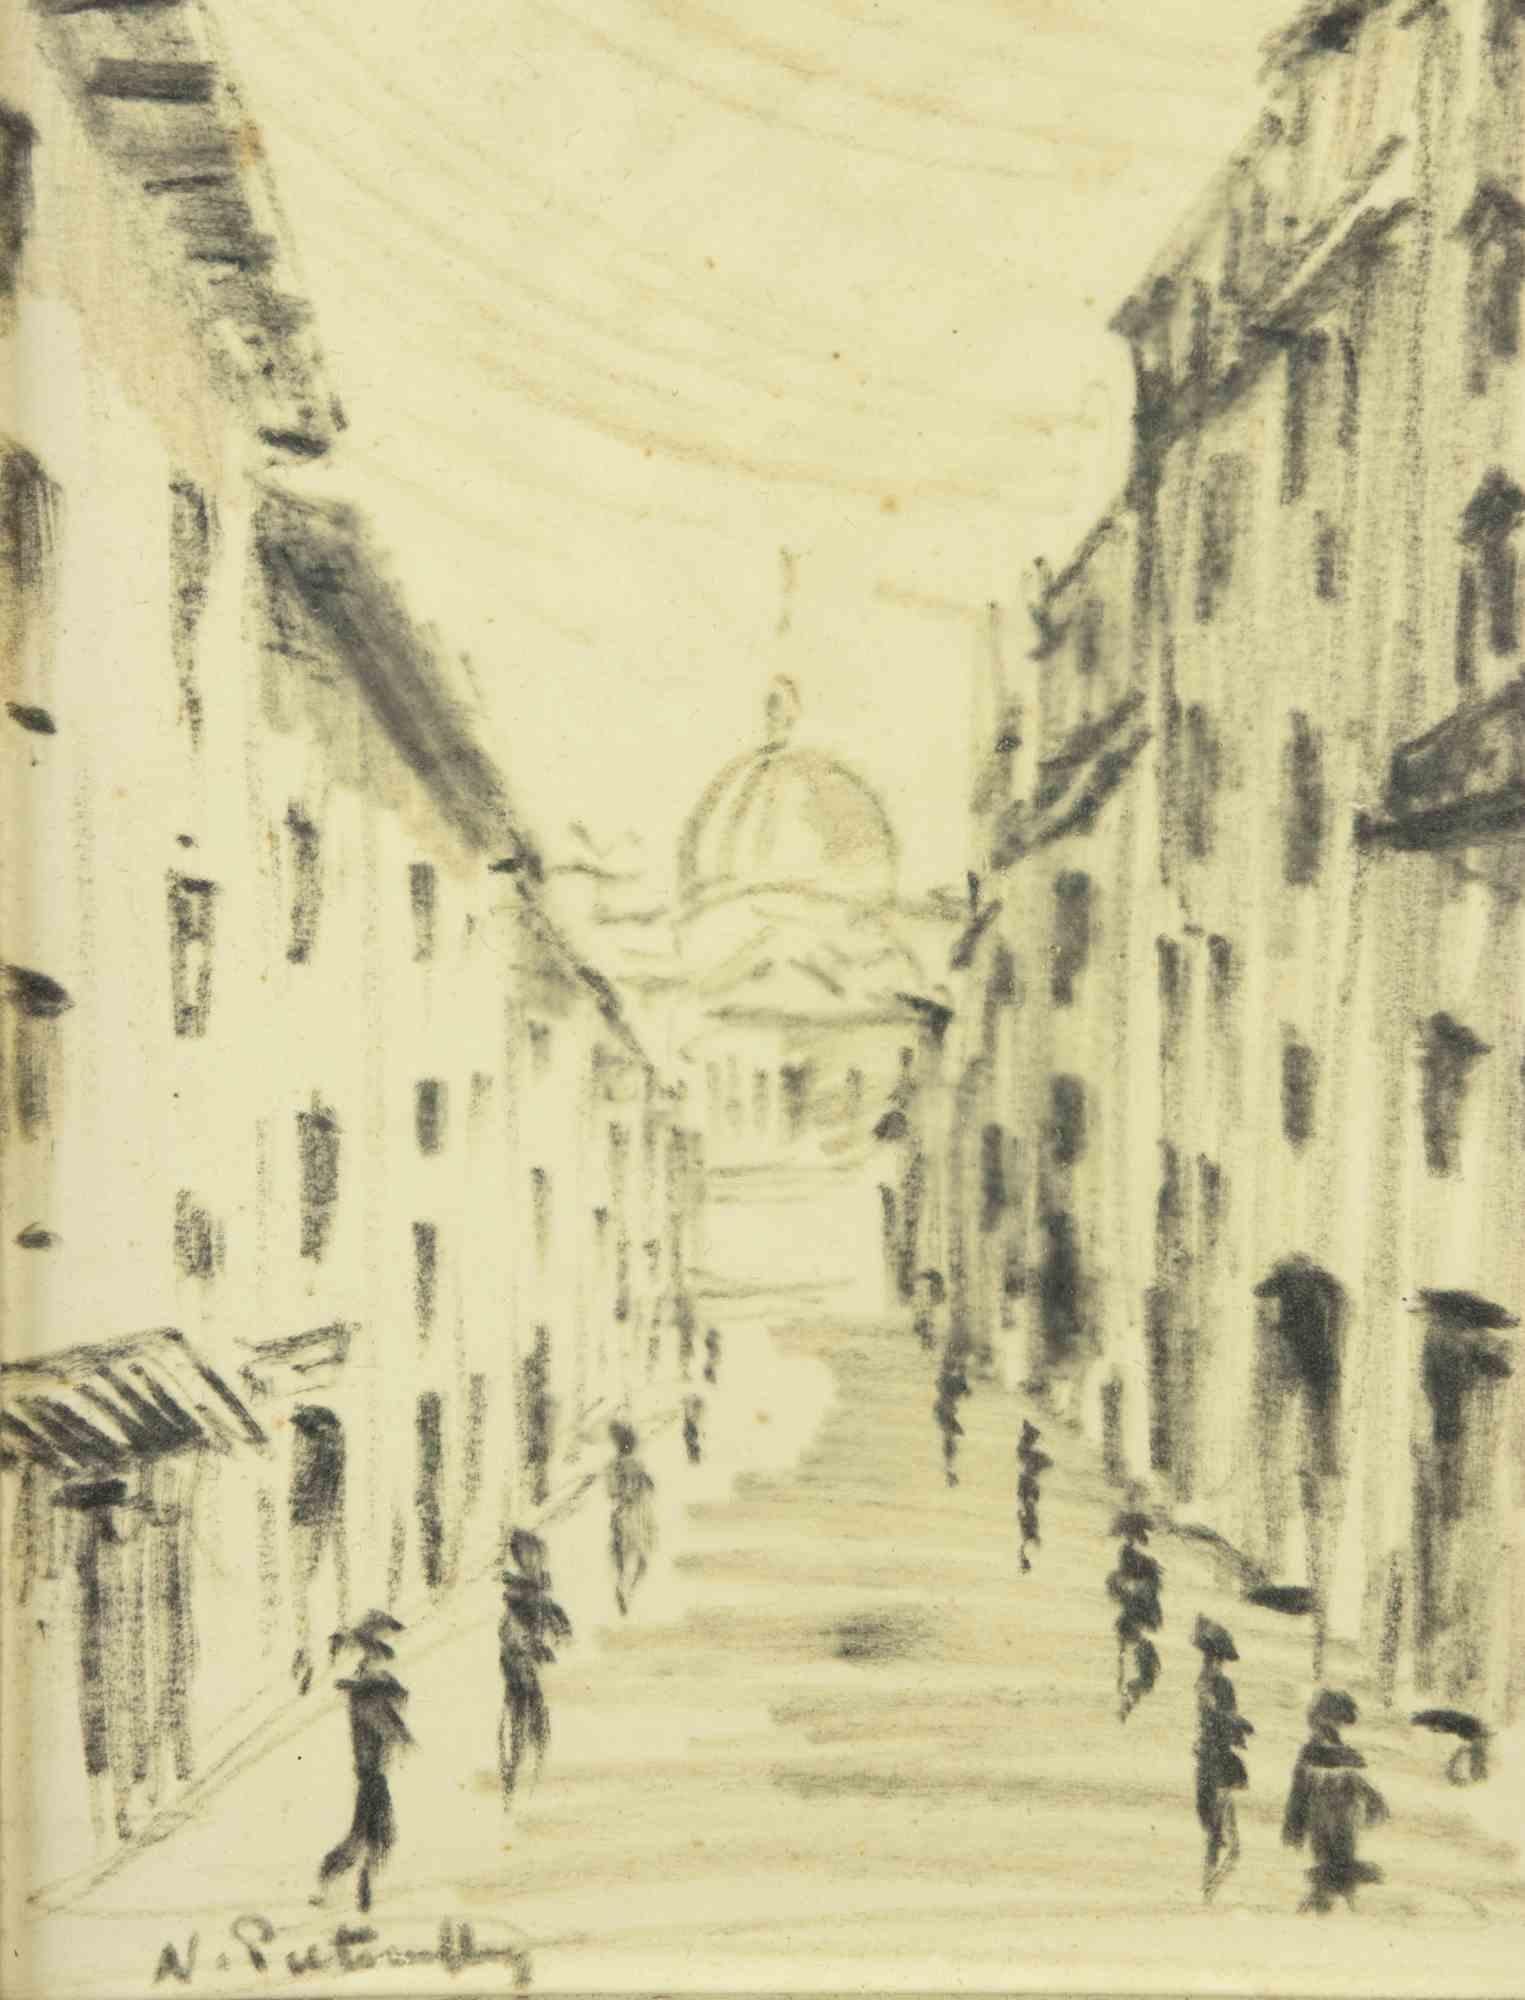  The Road to Saint Peter - Drawing - 1990s - Art by Unknown